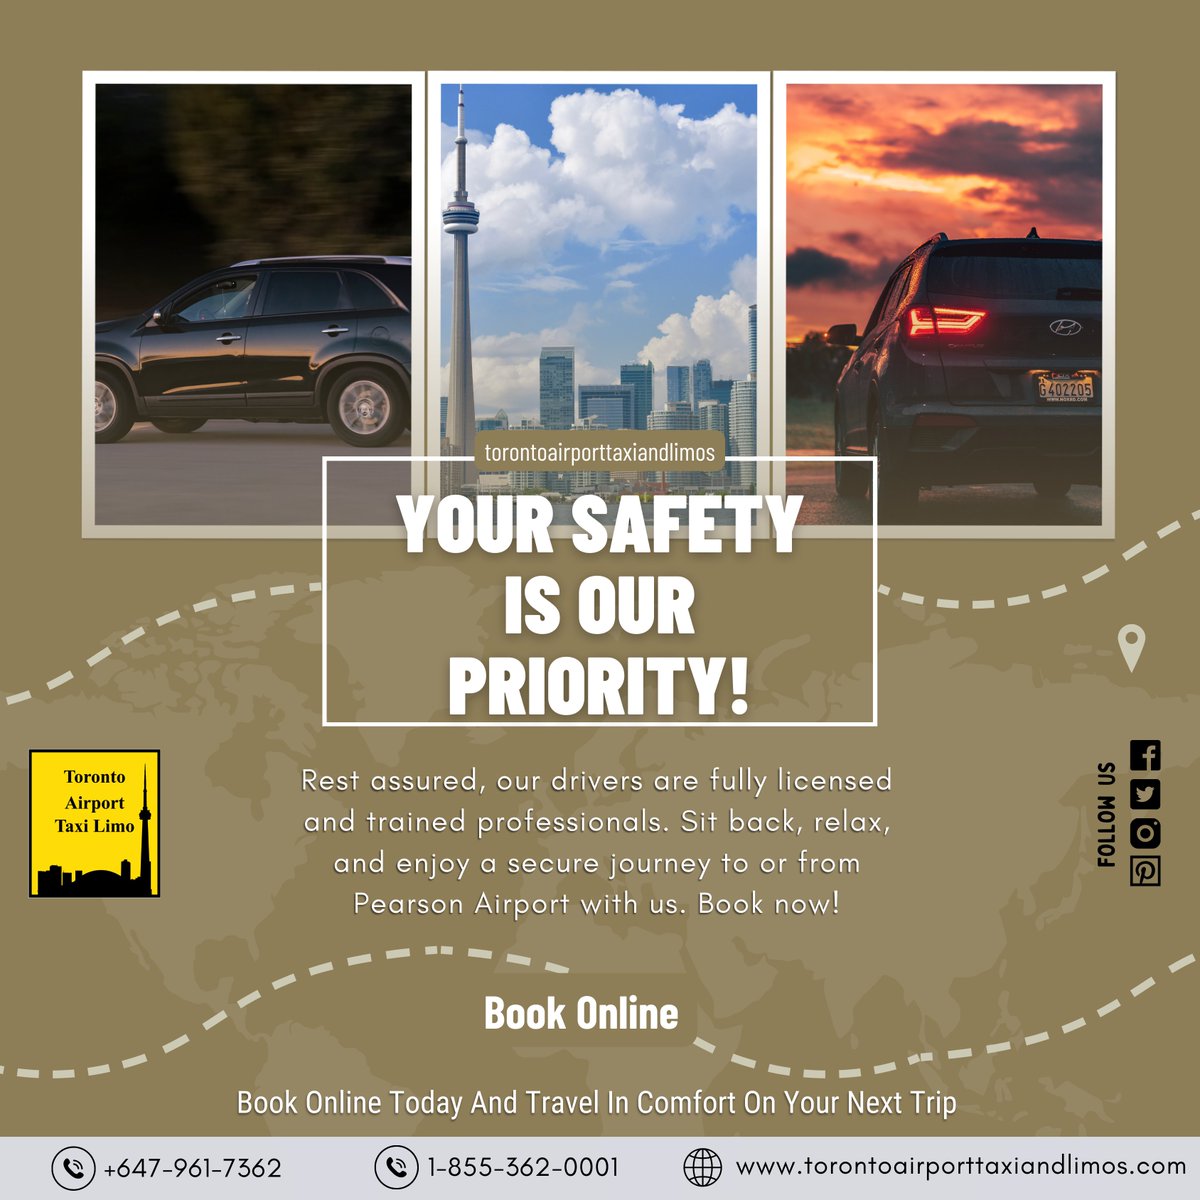 🚗✈️ Your safety is our priority! Rest assured, our drivers are fully licensed and trained professionals. Sit back, relax, and enjoy a secure journey to or from Pearson Airport with us. Book now! 🌟

#SafeTravel #AirportTransfer #ProfessionalDrivers #TravelComfort #SecureJourney